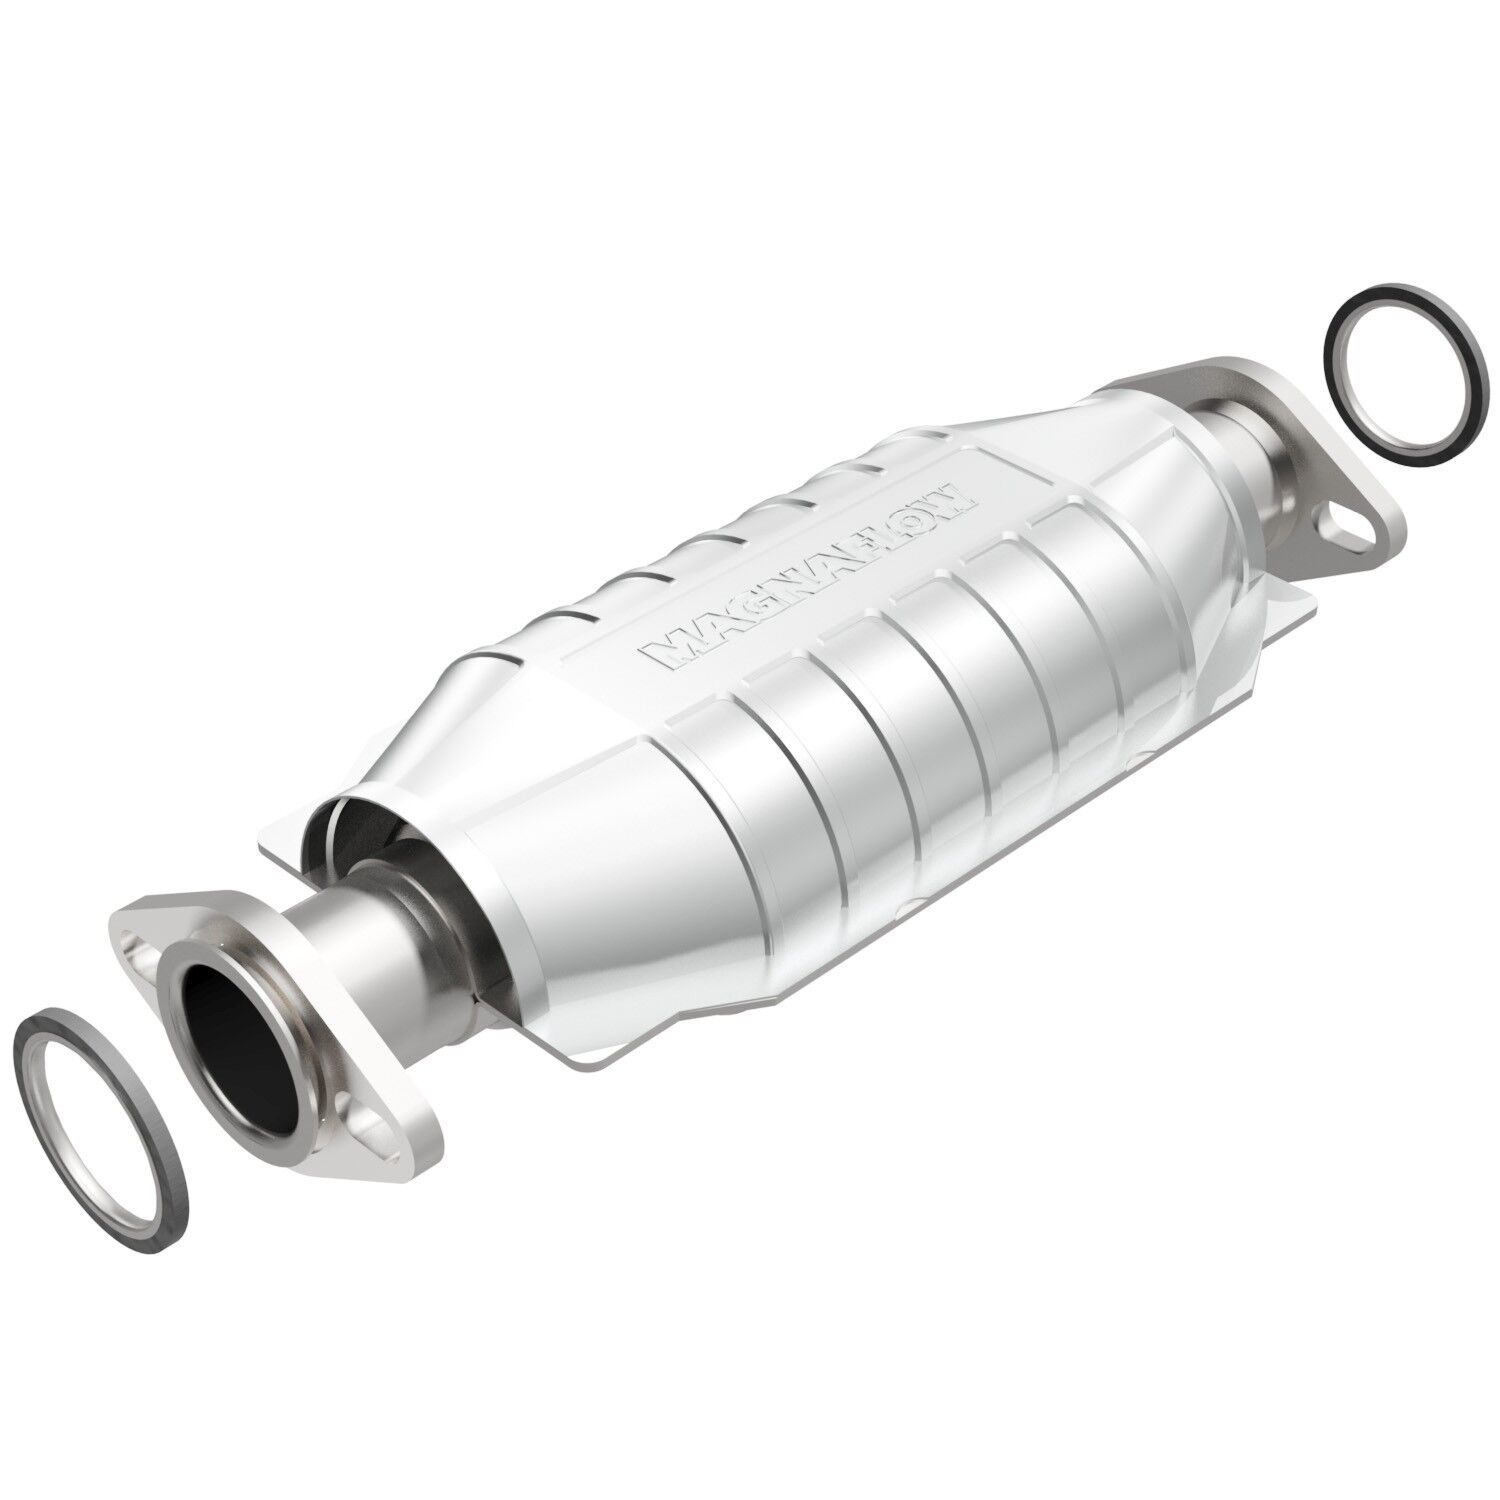 NEW Magnaflow 23244 Direct Fit Catalytic Converter Stealth 3000GT Plymouth Laser